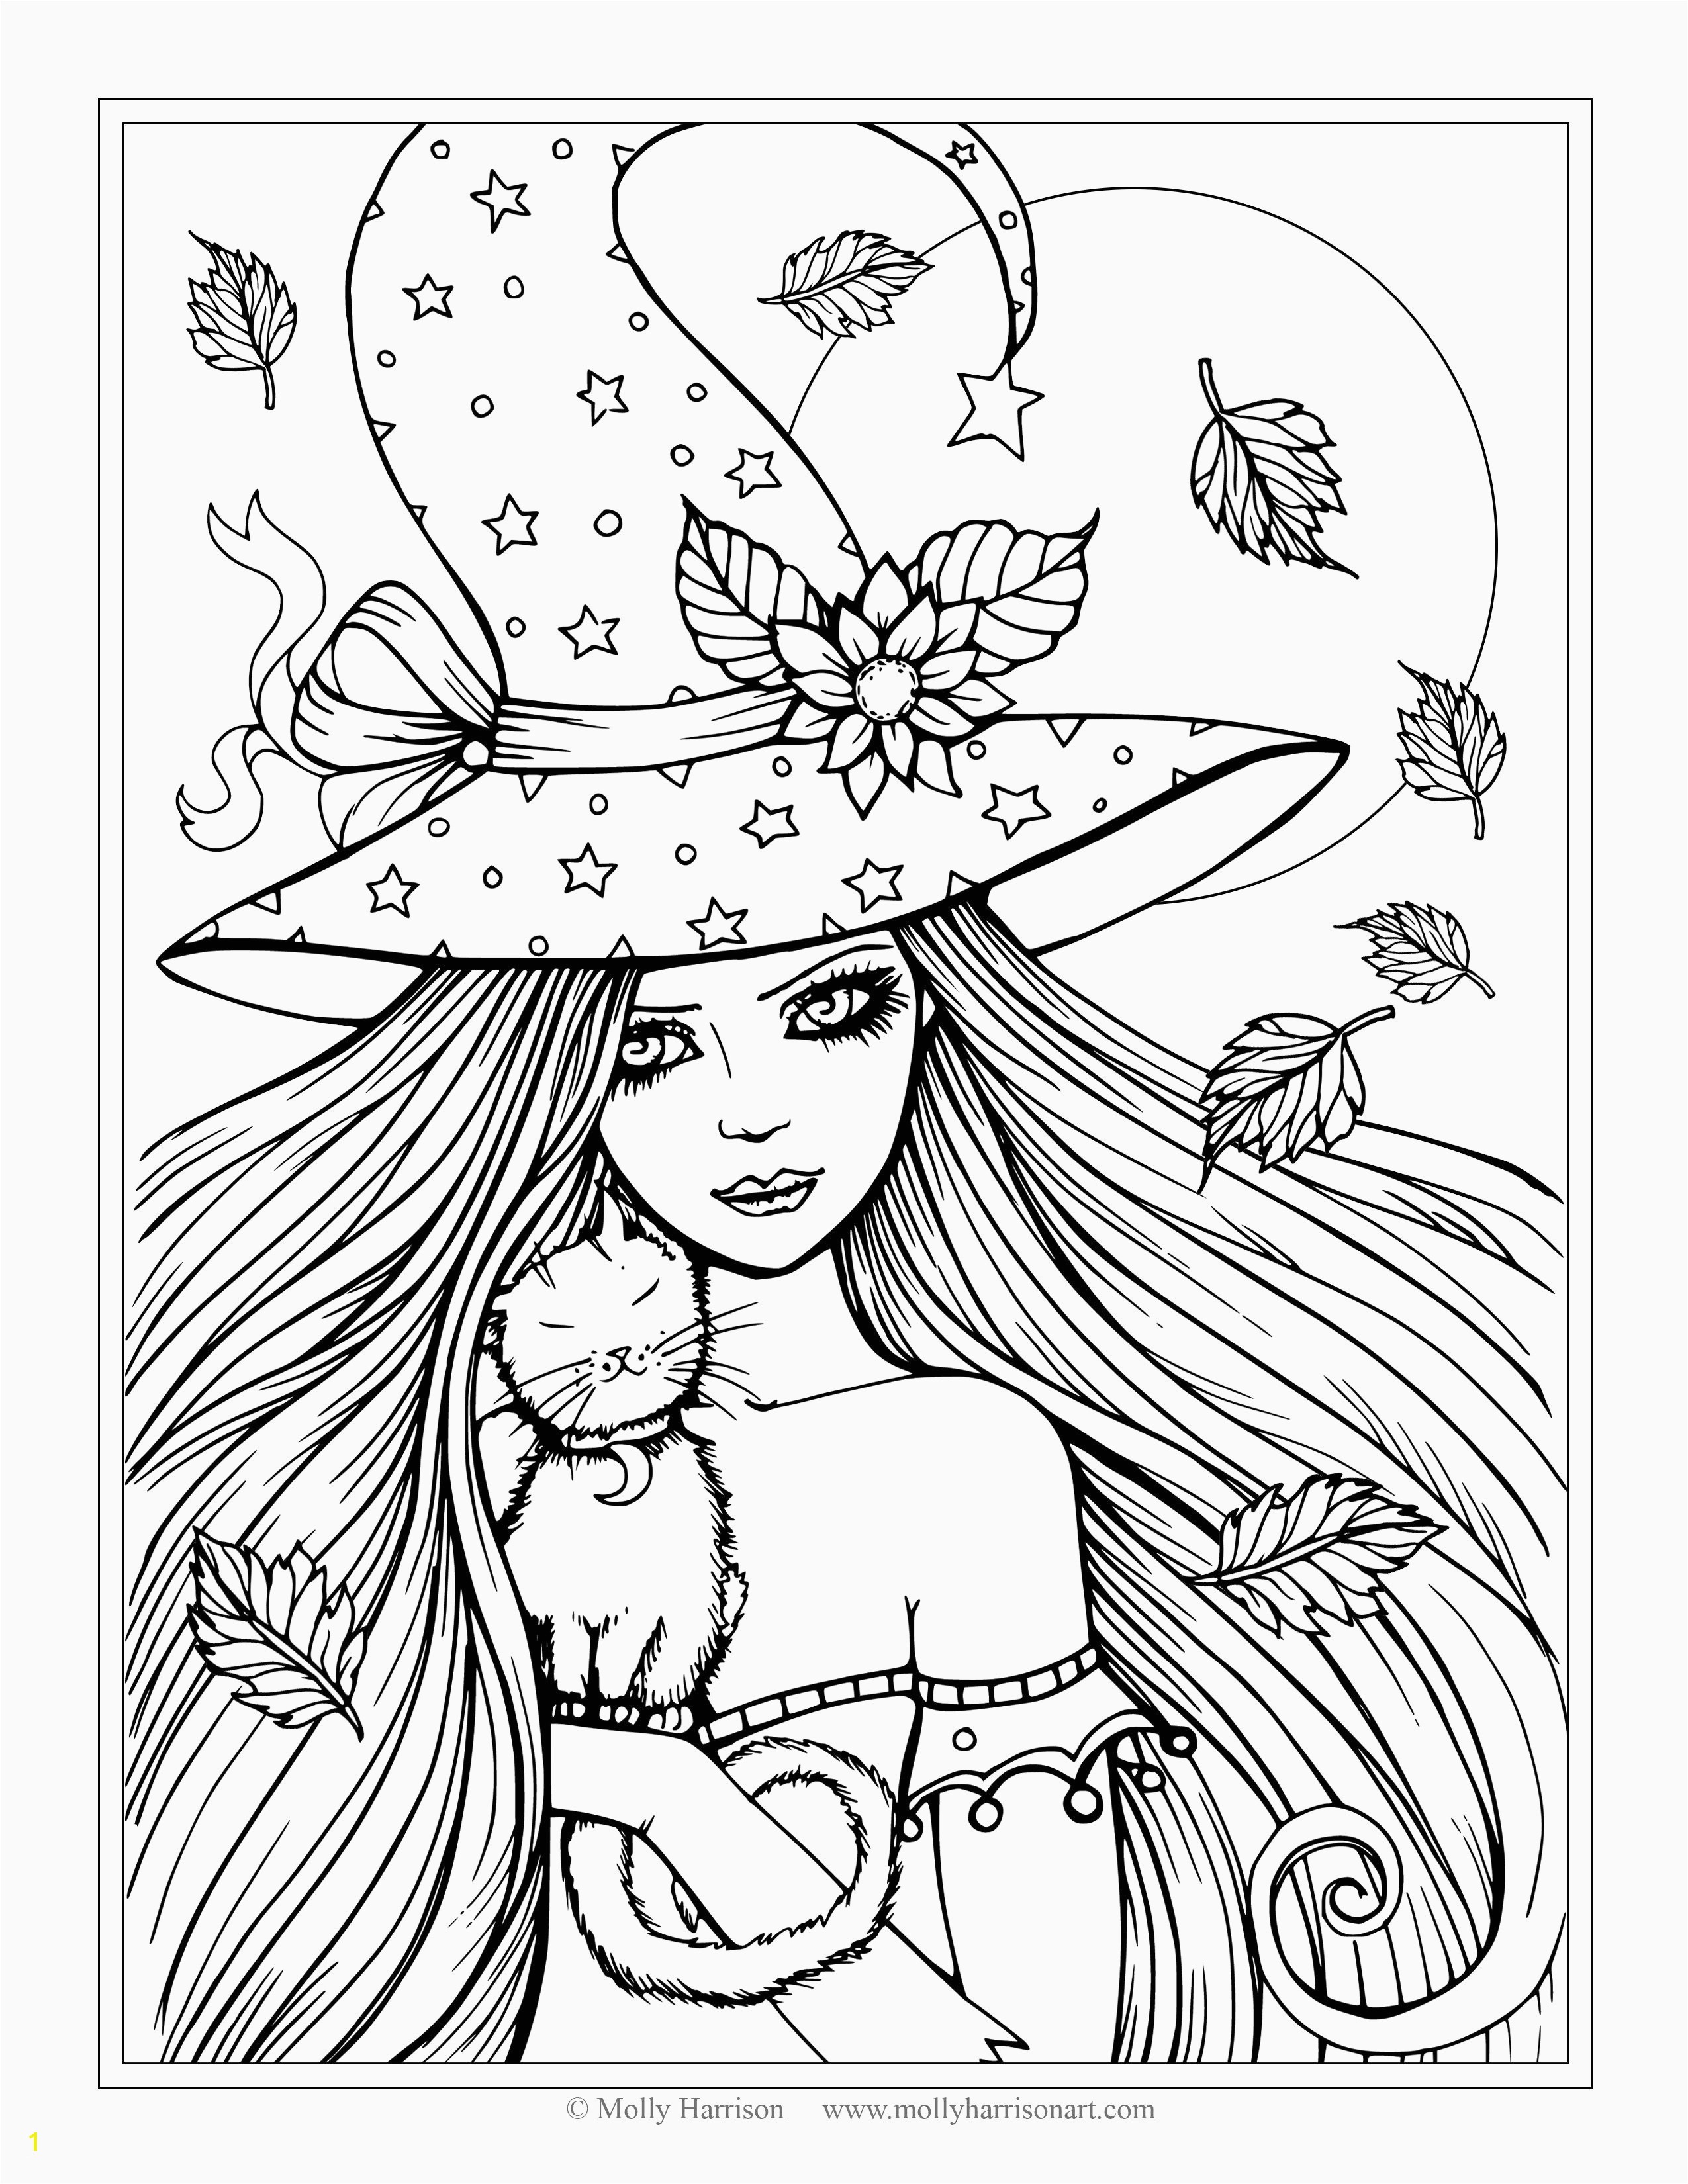 Lego Lone Ranger Coloring Pages Kids Printable Coloring Pages Coloring Pages